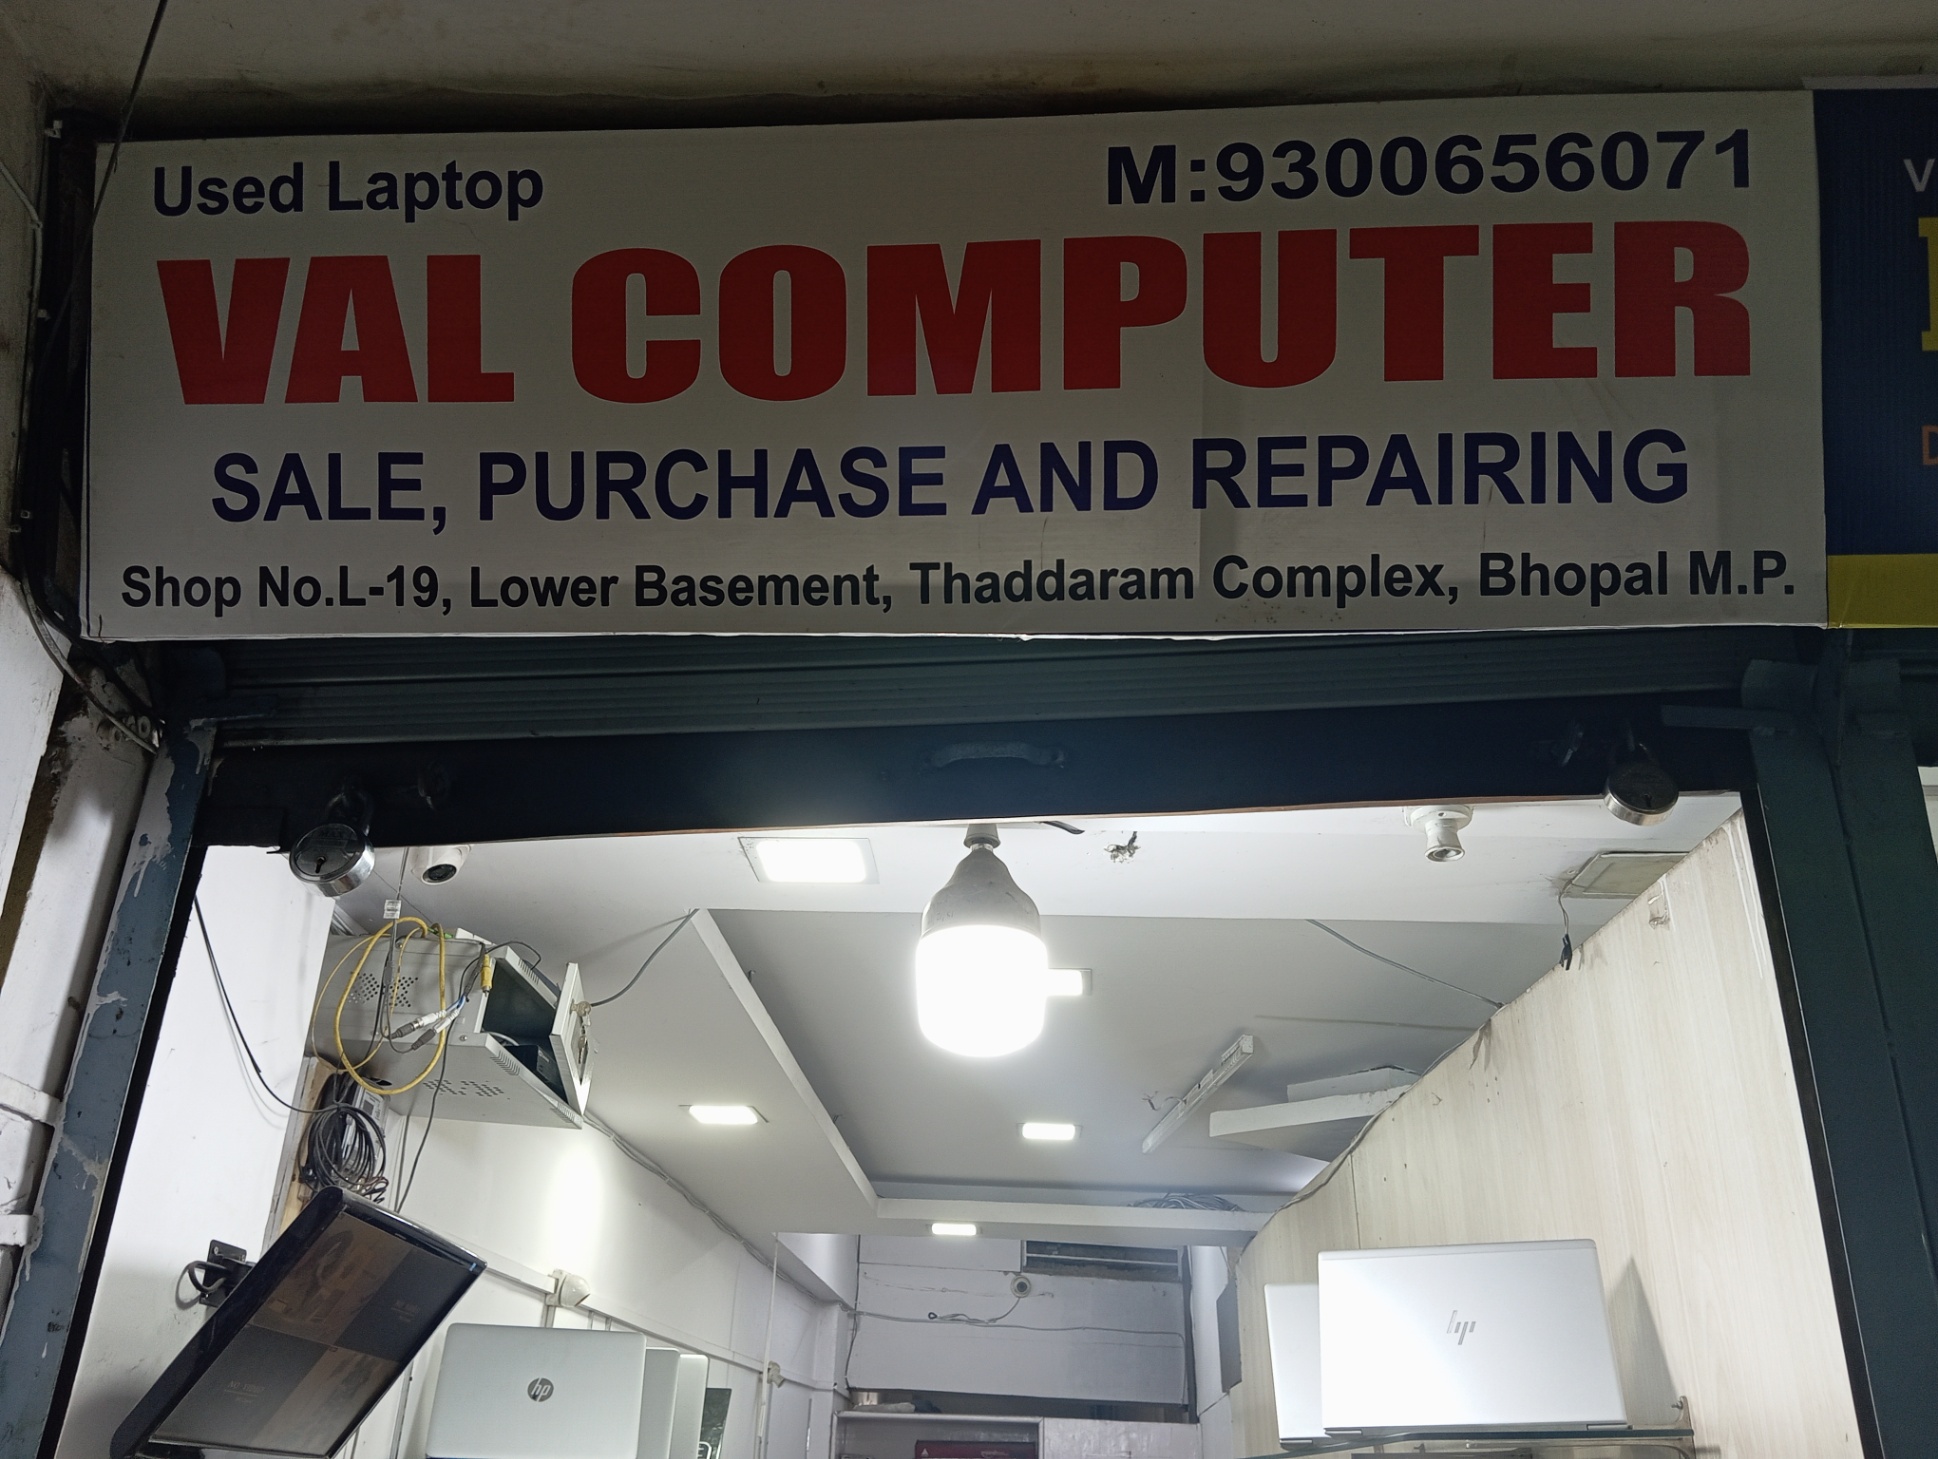 Second Hand Laptops And MacBook on Sale & Purchase 